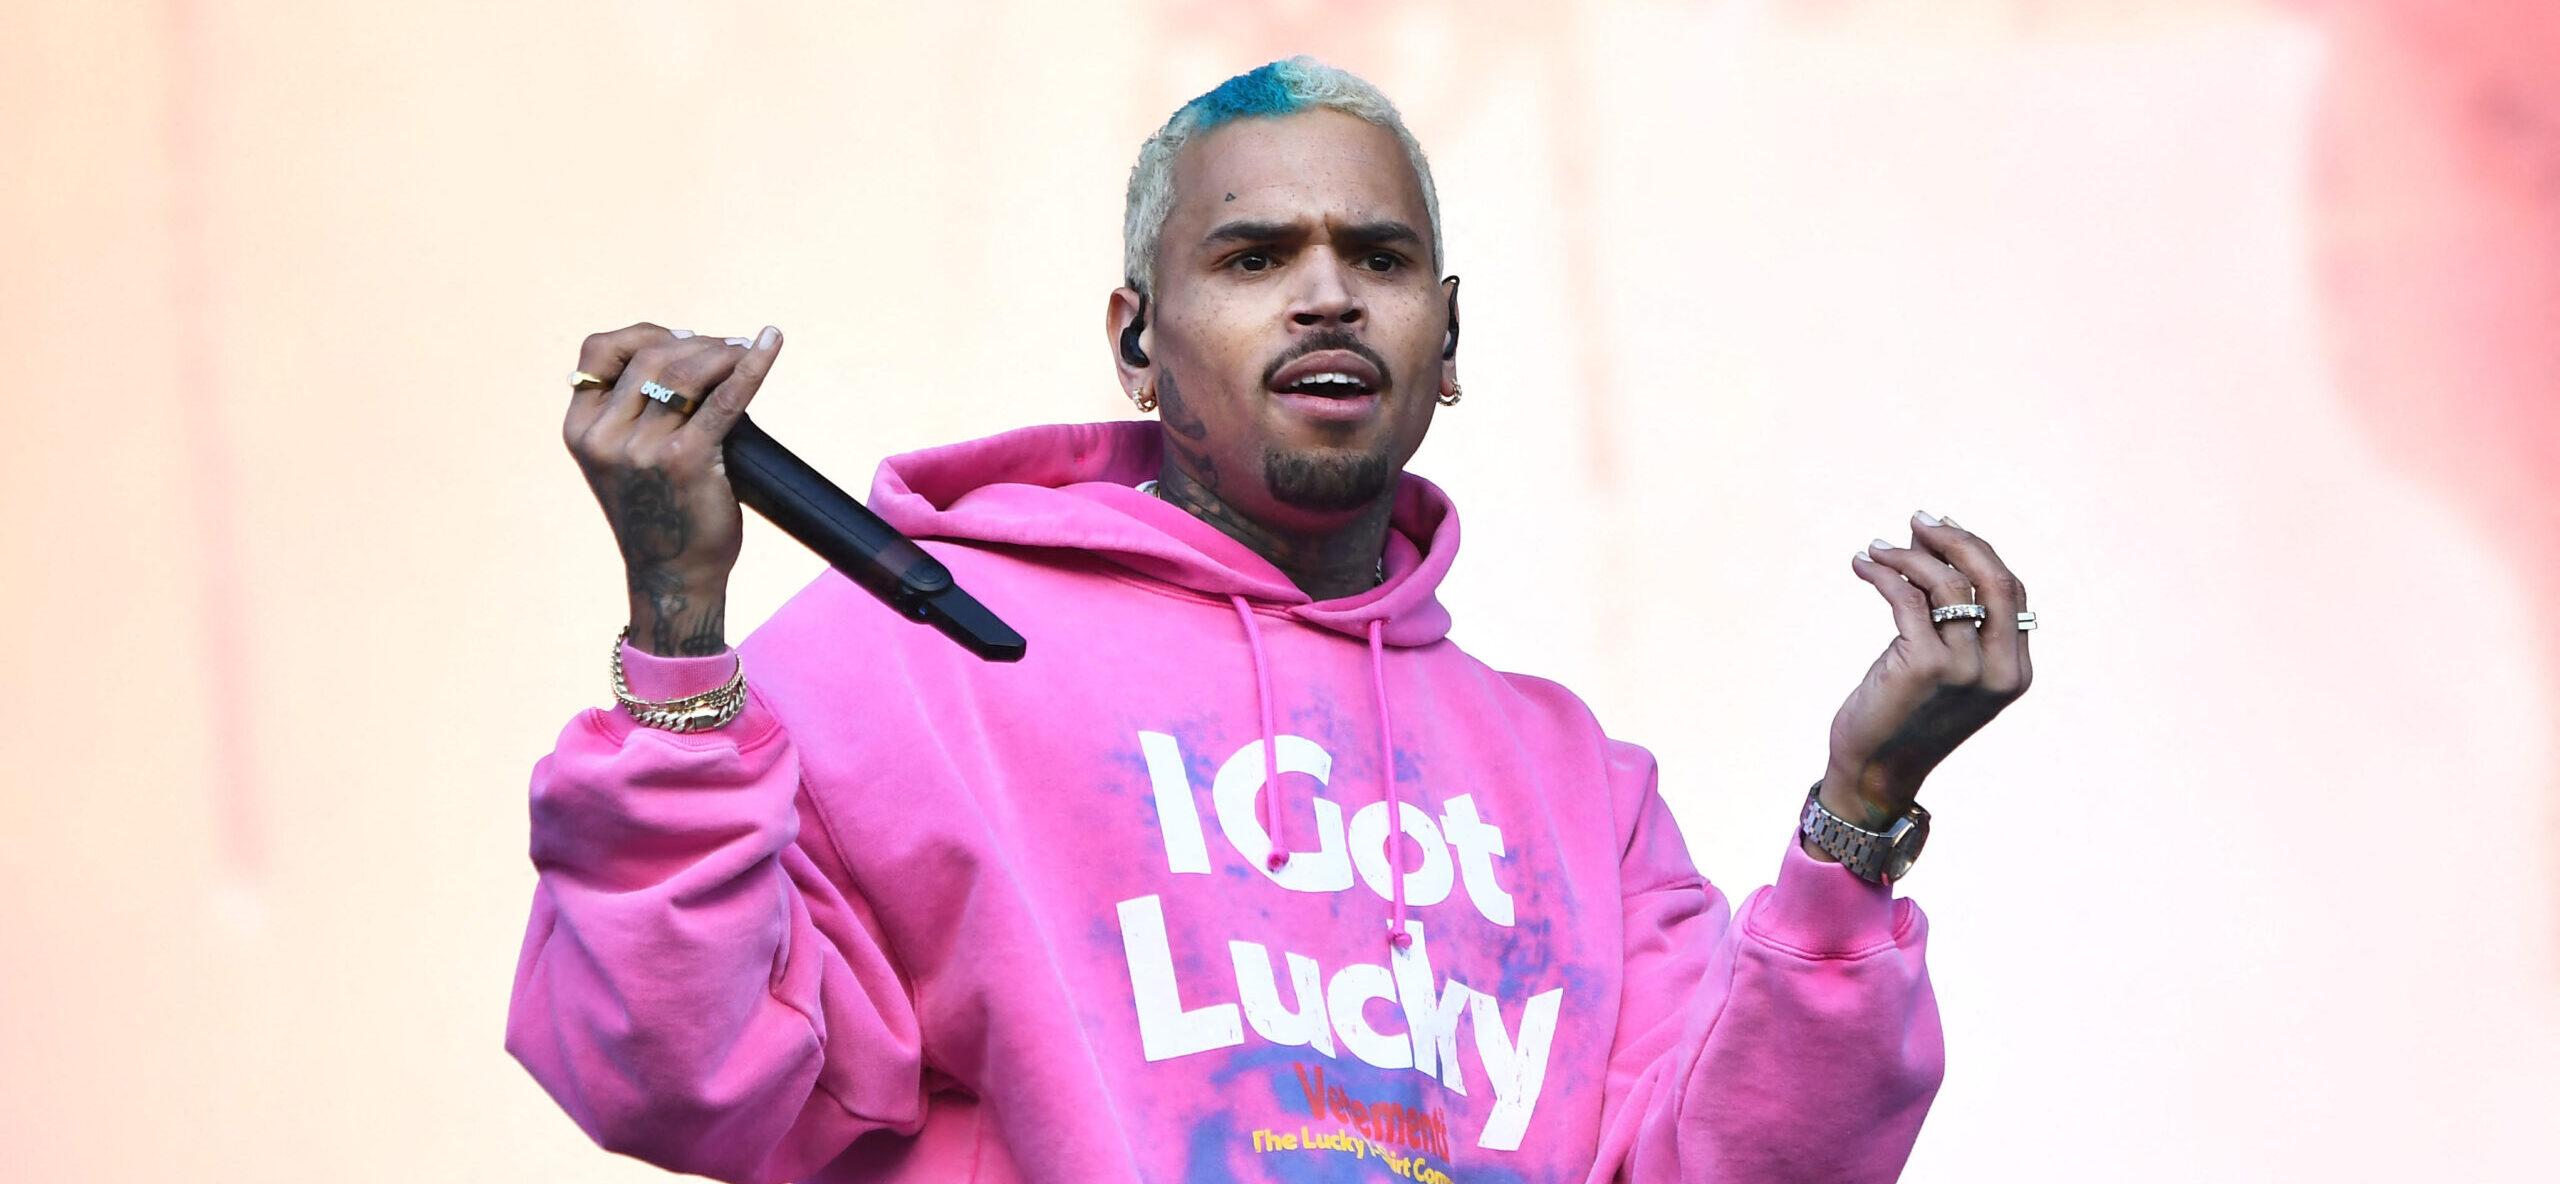 Chris Brown A ‘Fugitive’ In England After Allegedly Hitting Man With Tequila Bottle